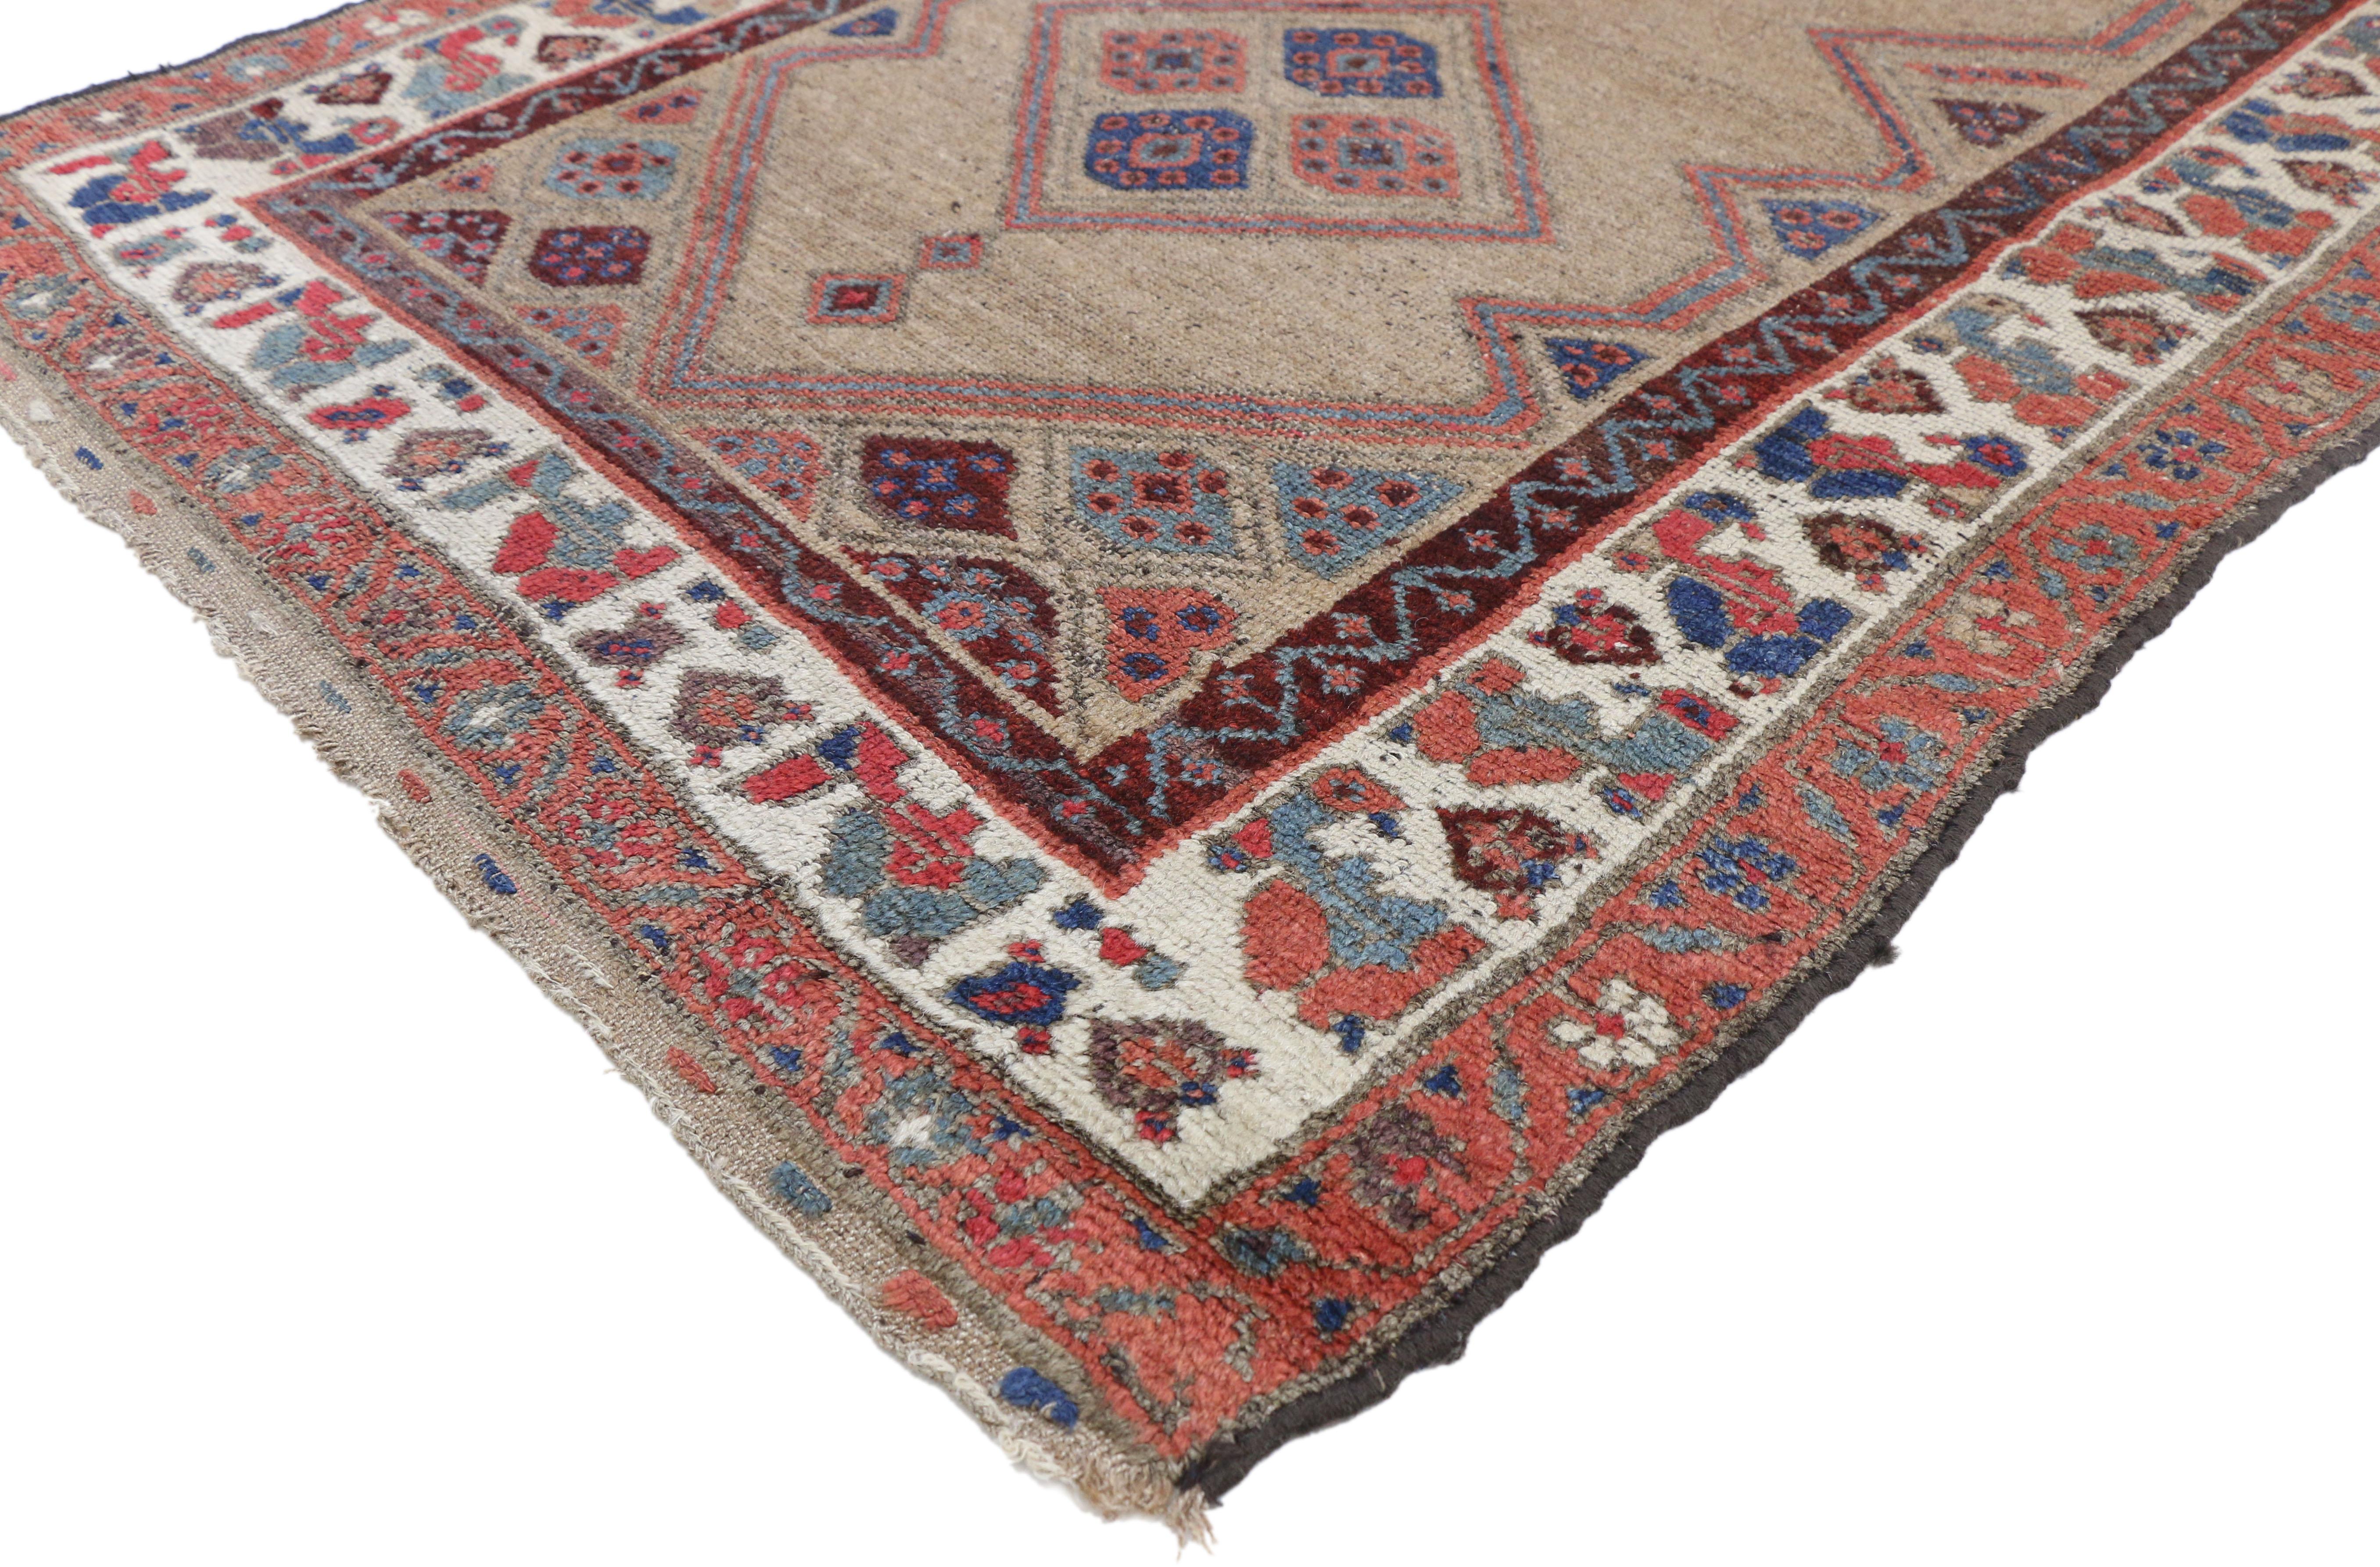 76884, antique Persian Malayer accent rug, entry or foyer rug. This hand knotted antique Persian Malayer rug features two diamond medallions each filled with four lozenges flanked with expanding lozenges. The medallions float on an open abrashed